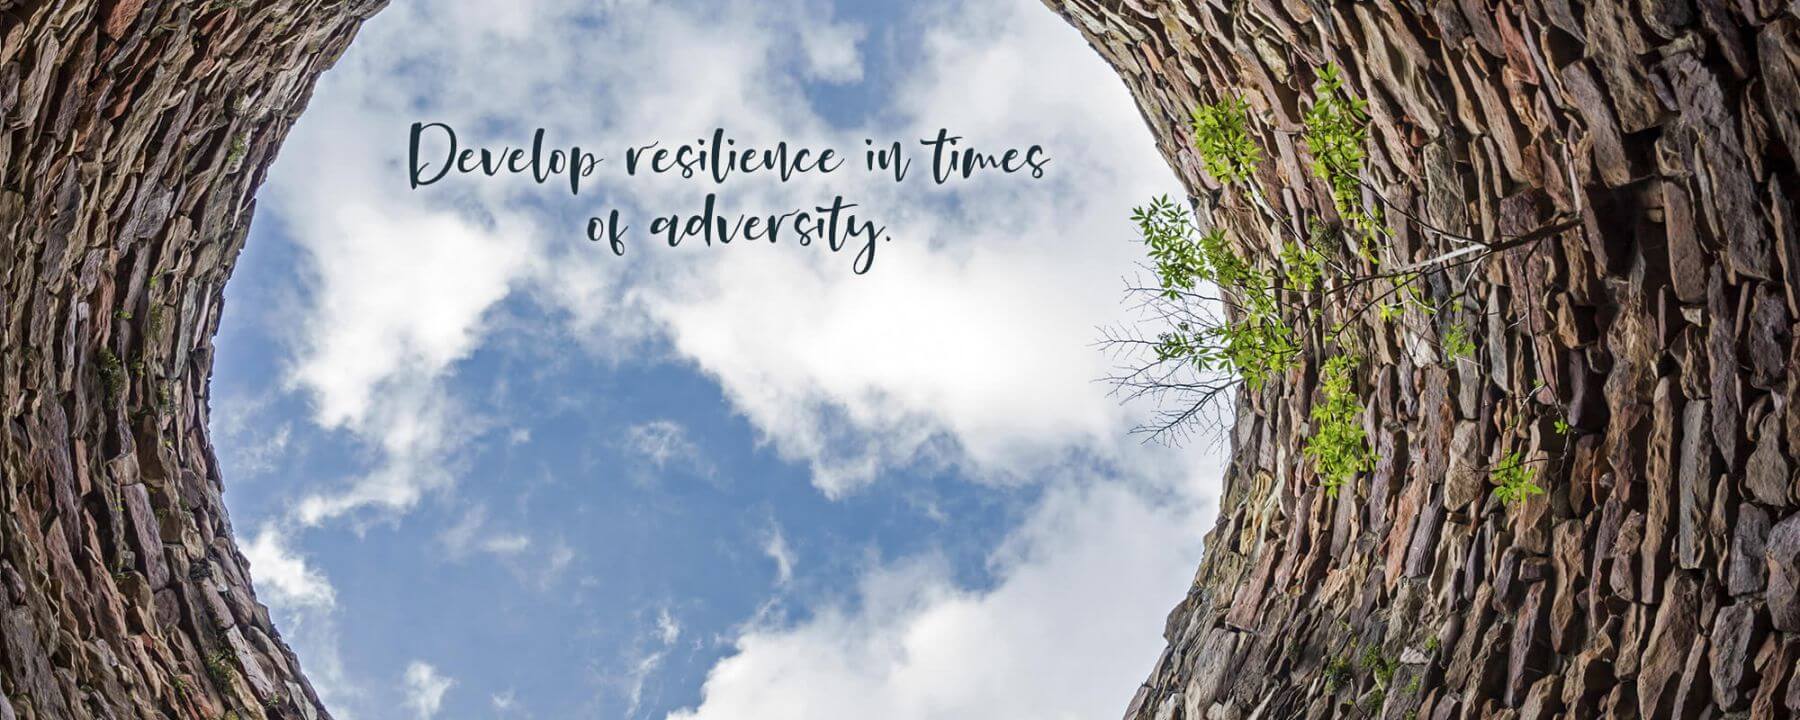 Develop resilience in times of adversity.